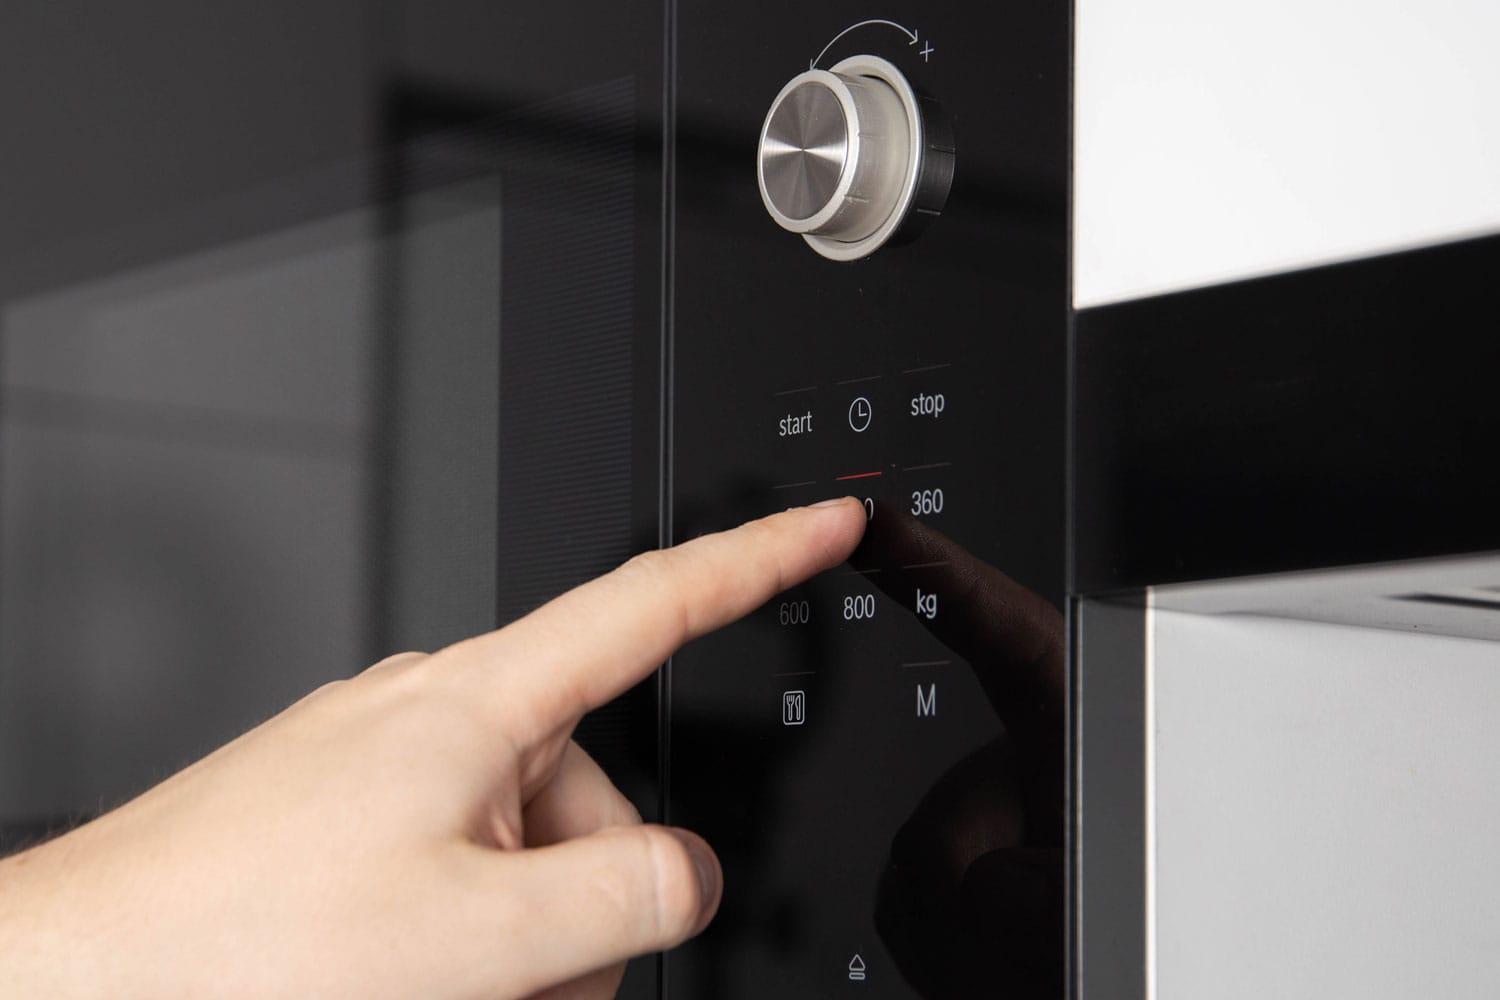 A man's hand is pressing the touch panel of a modern microwave oven to reset the Panasonic microwave.